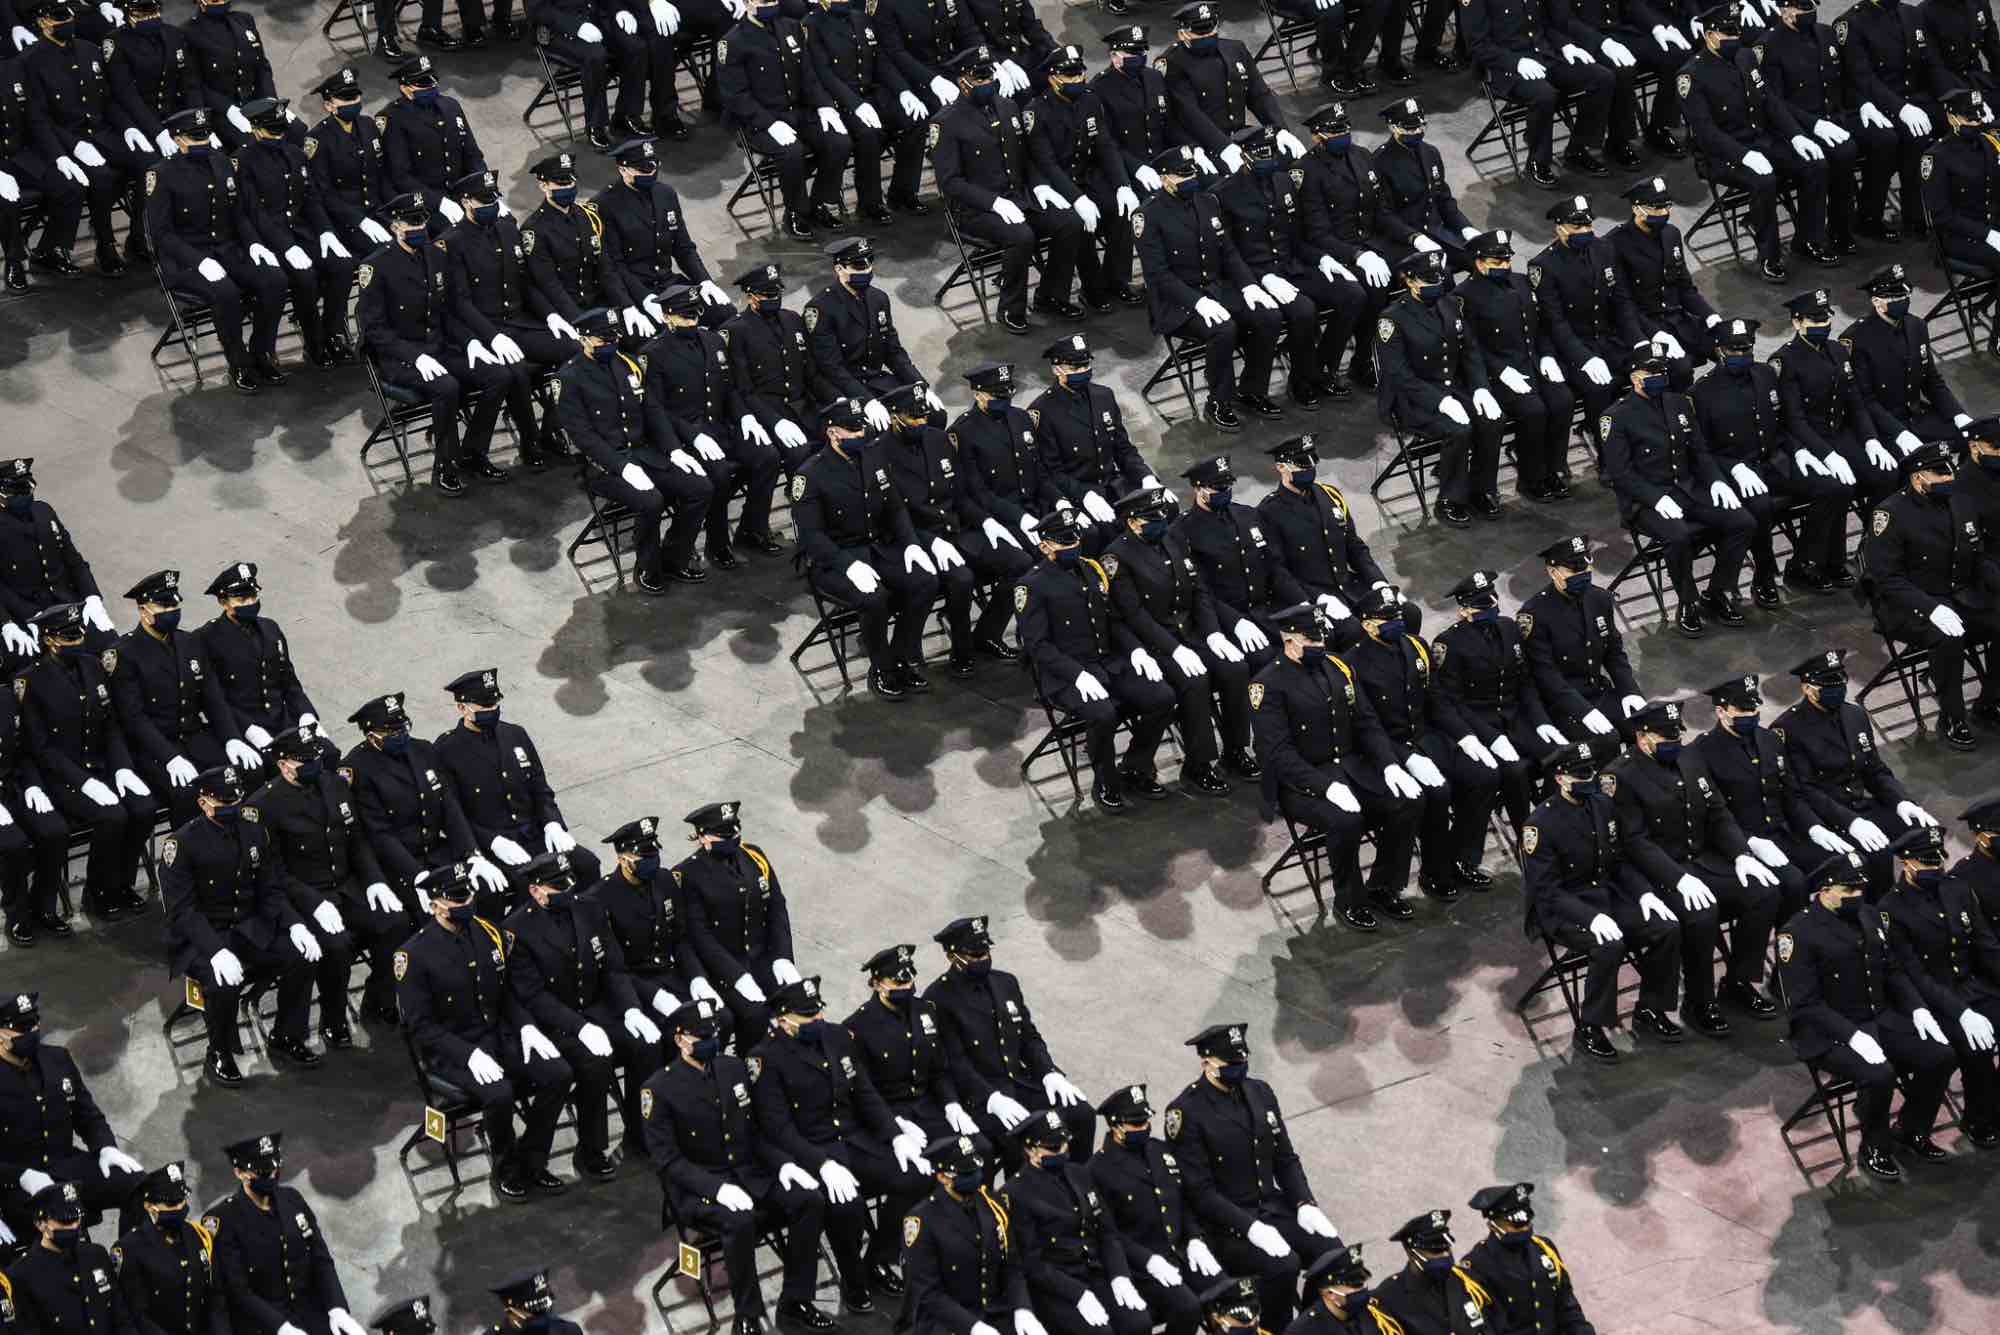 Rows and rows of uniformed police officers at an NYPD graduation ceremony in 2021.